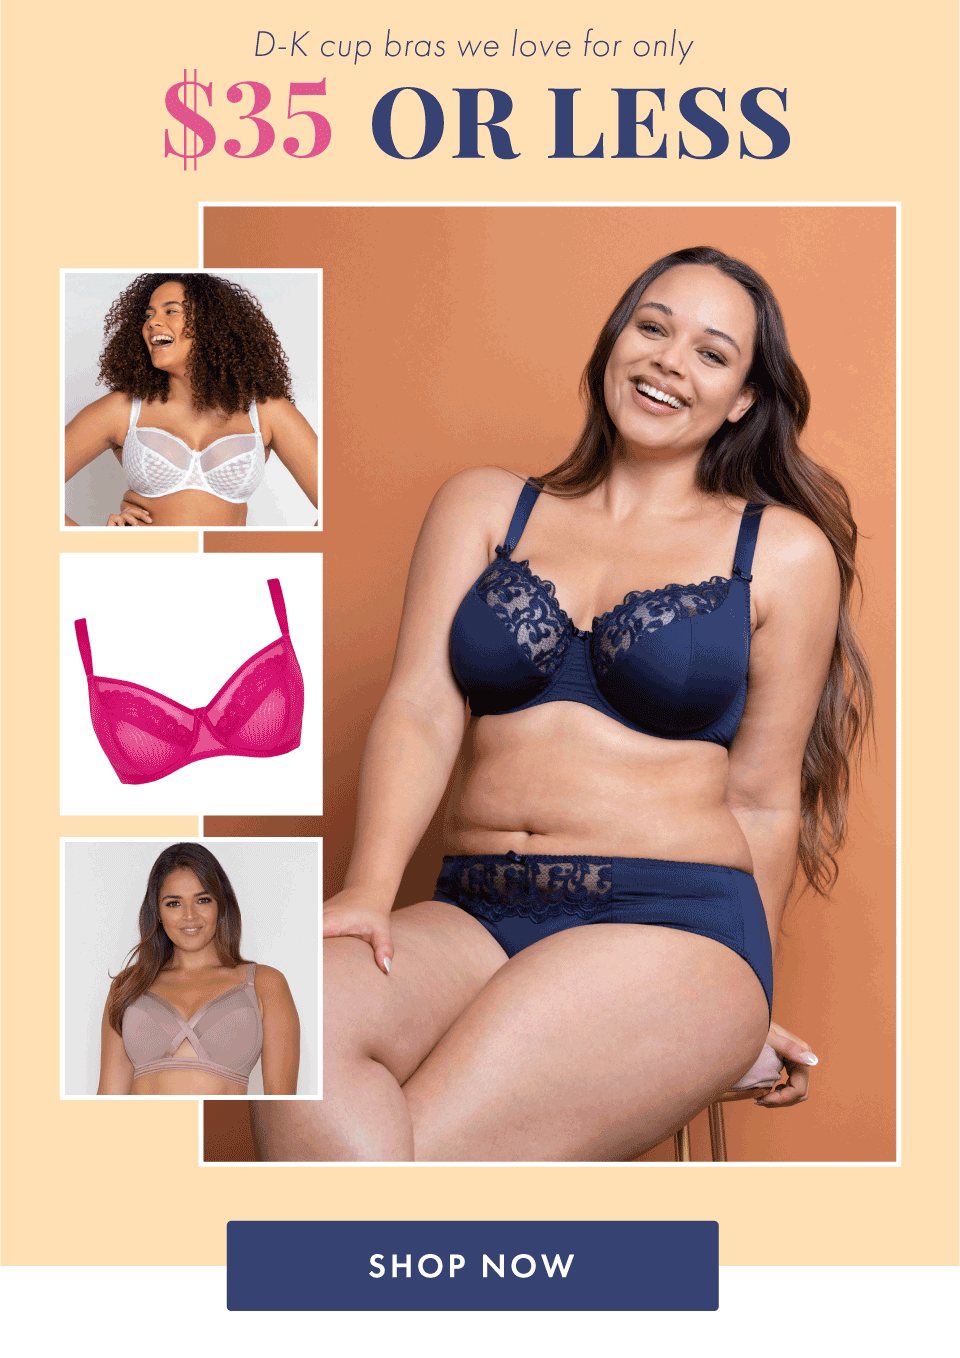 Brastop: OMG! All these bras are $35 or less